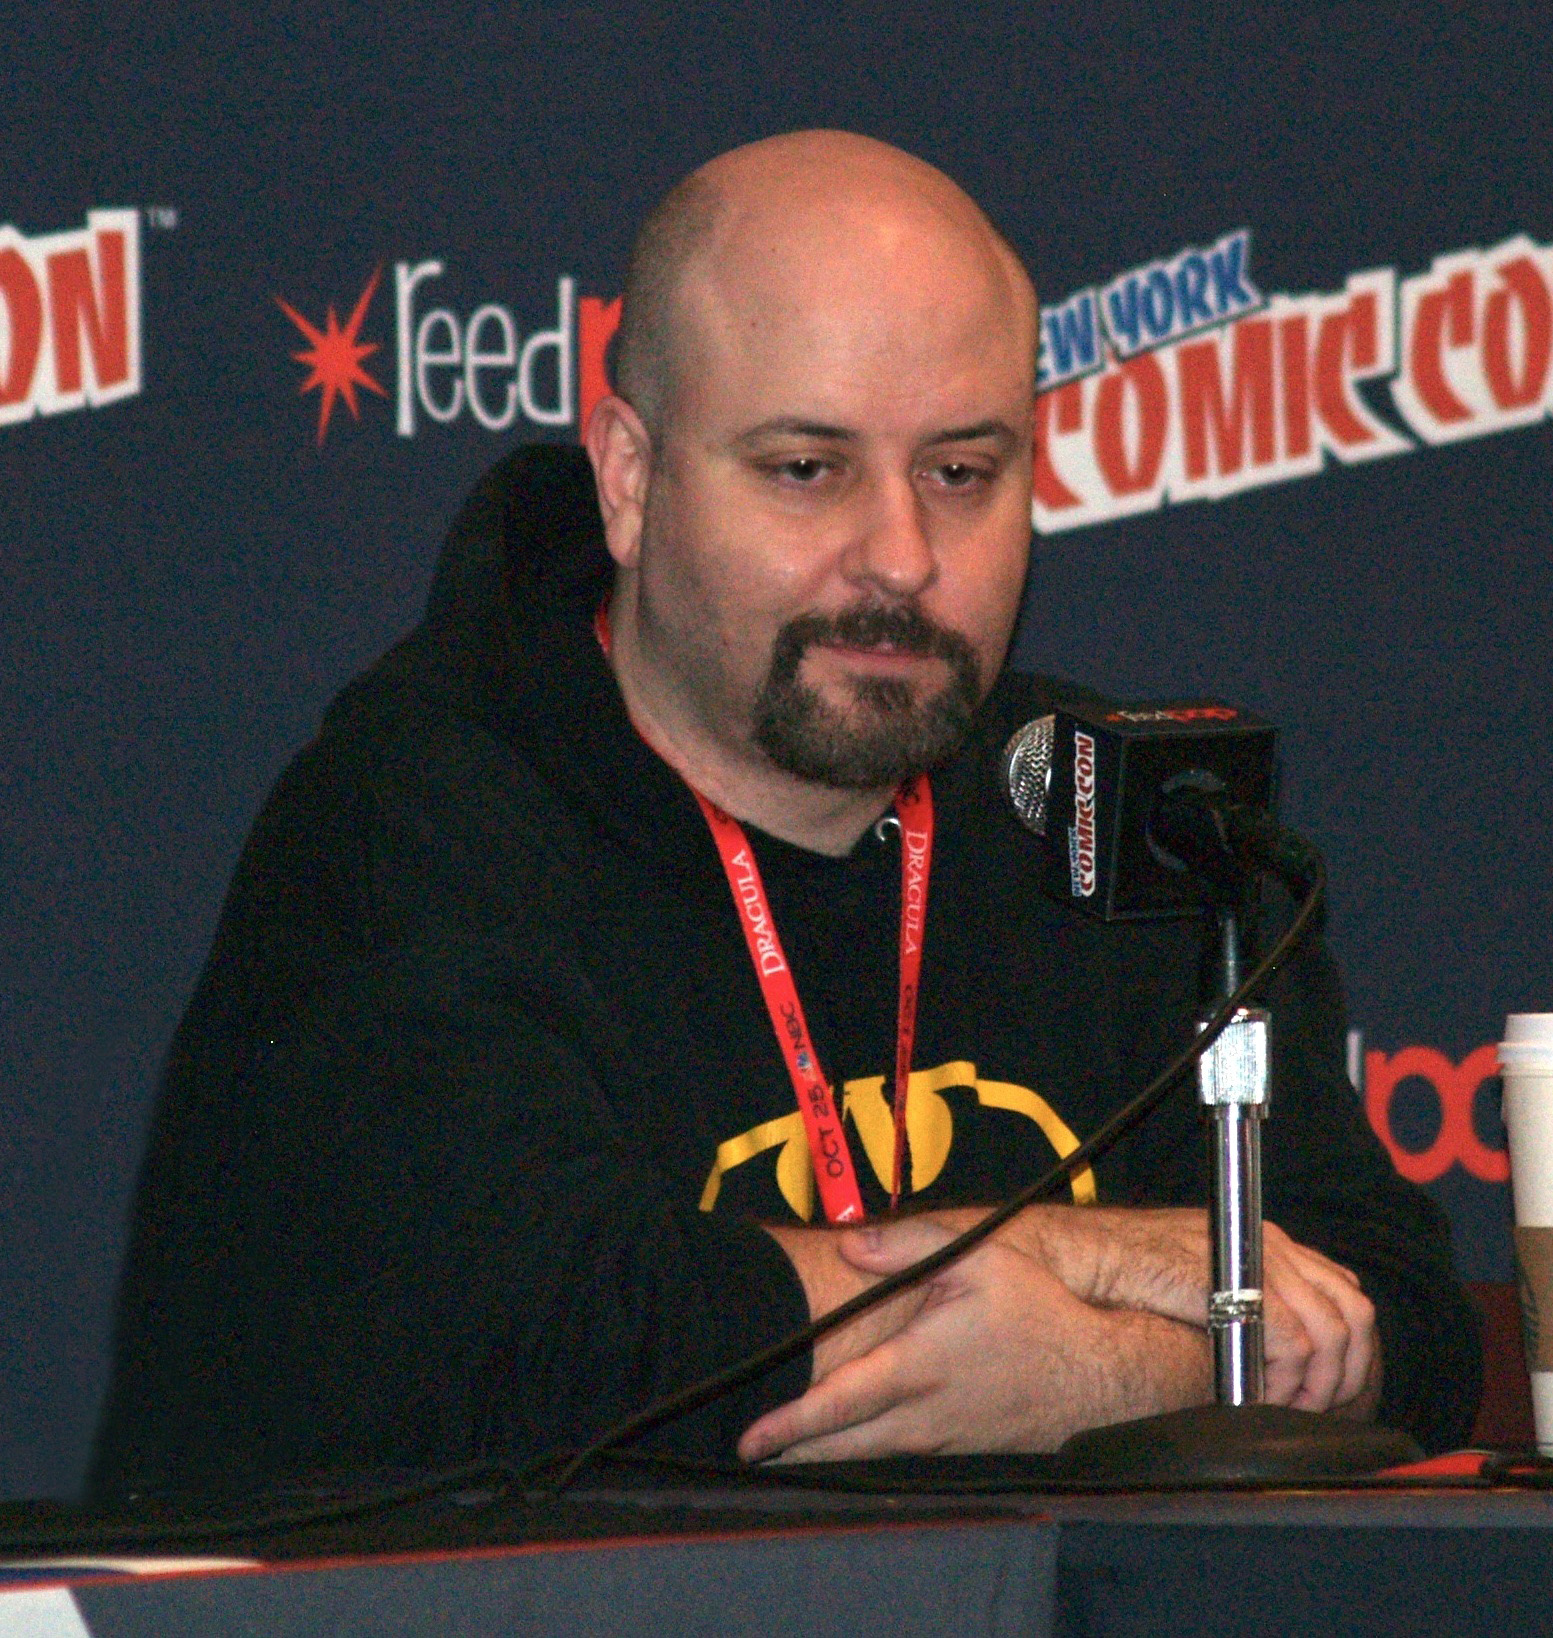 Andreyko at the 2013 [[New York Comic Con]]